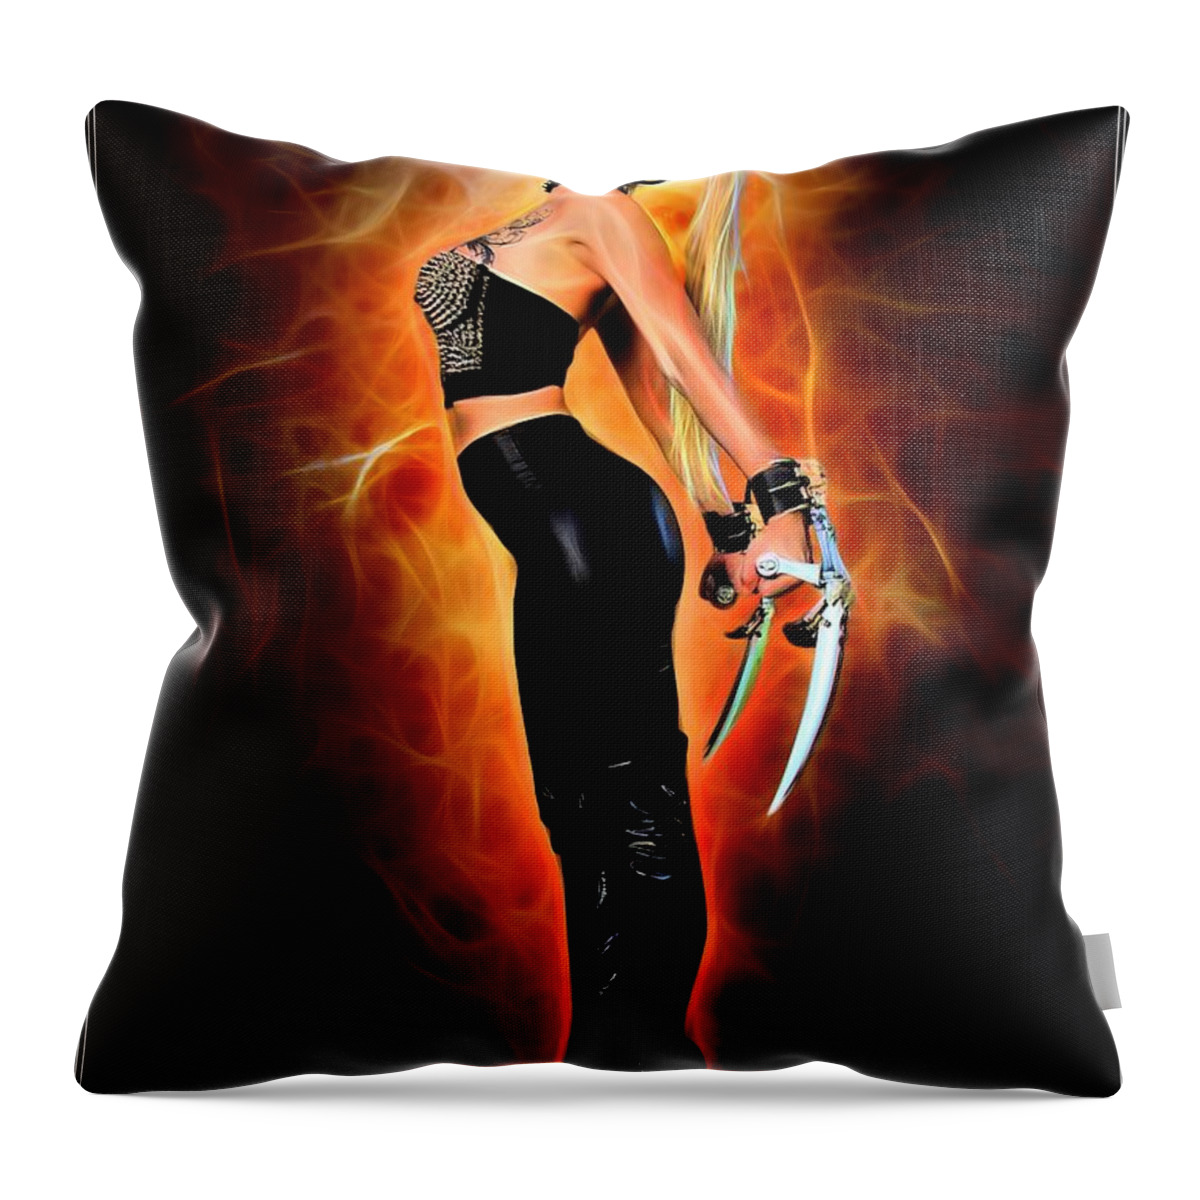 Fantasy Throw Pillow featuring the painting The Rise Of A Heroine by Jon Volden